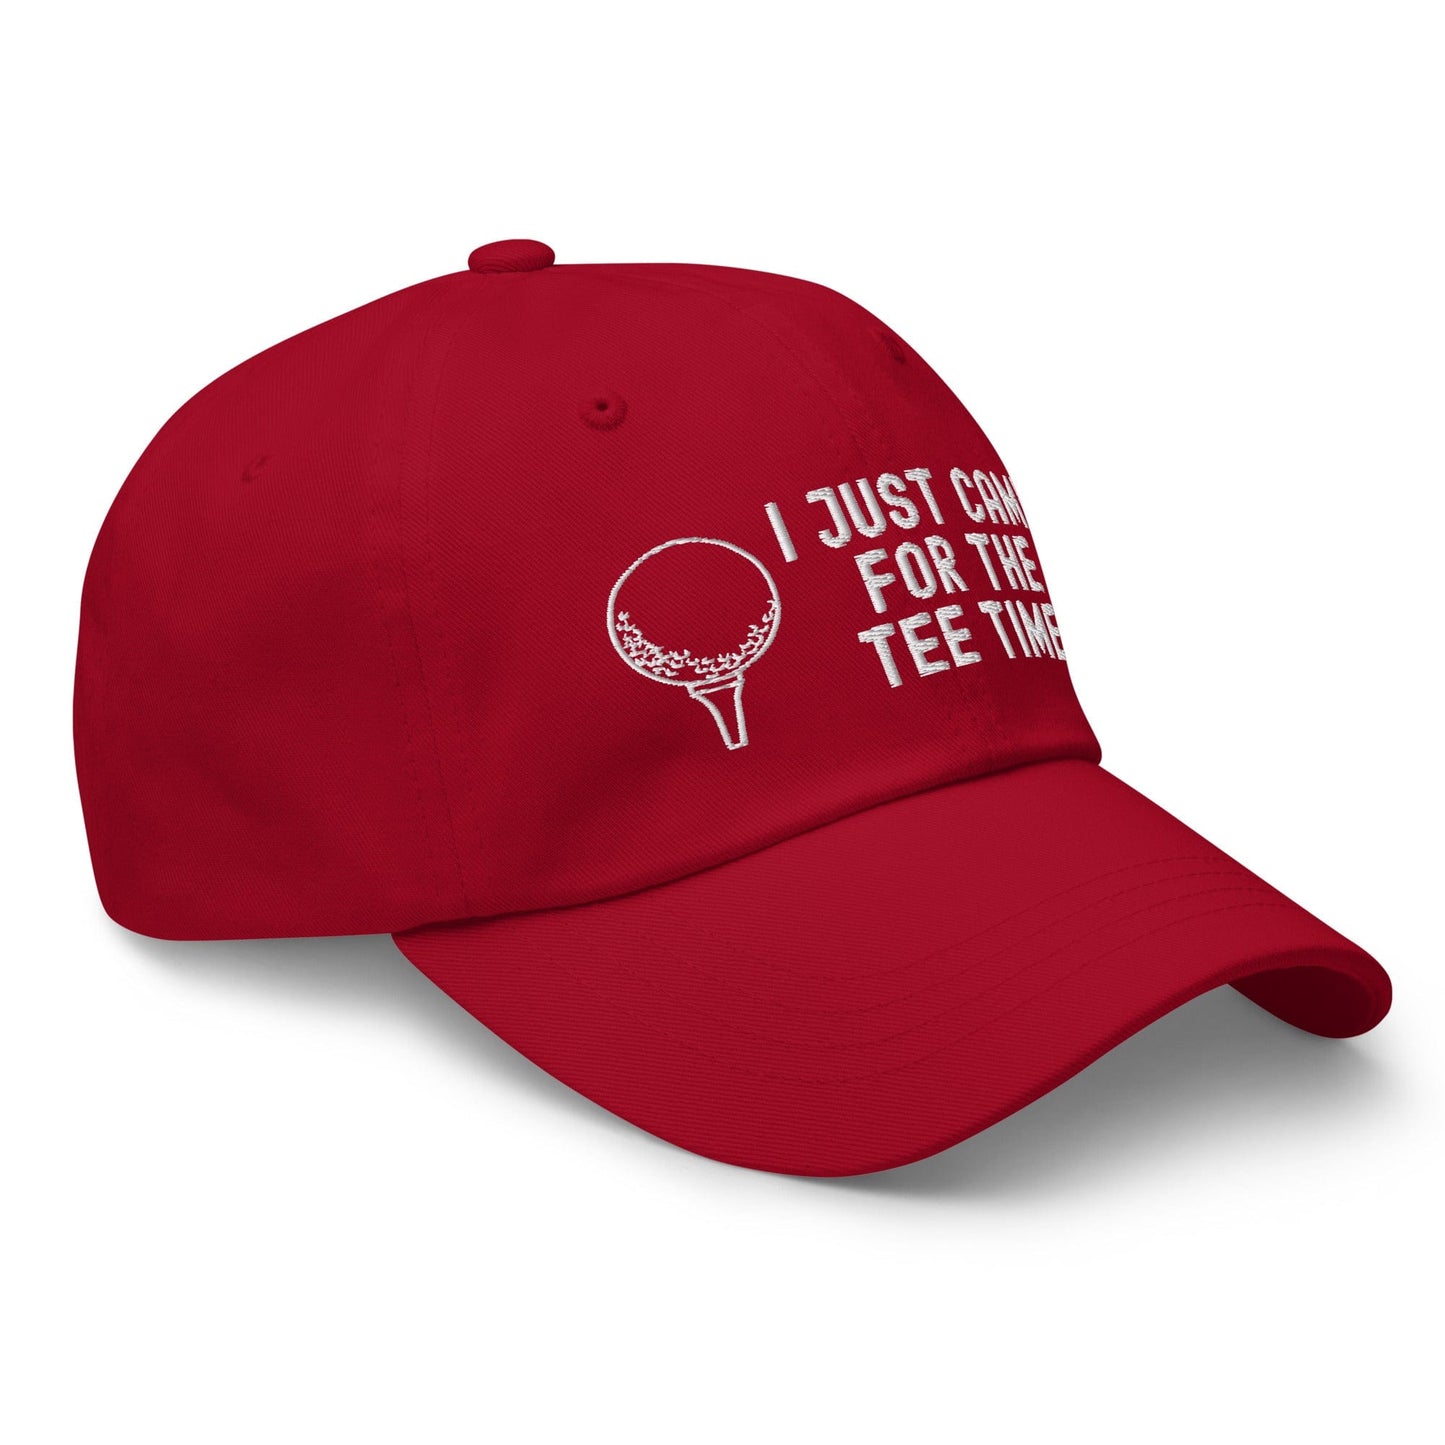 Funny Golfer Gifts  Dad Cap Cranberry I Just Came For The Tee Times Cap